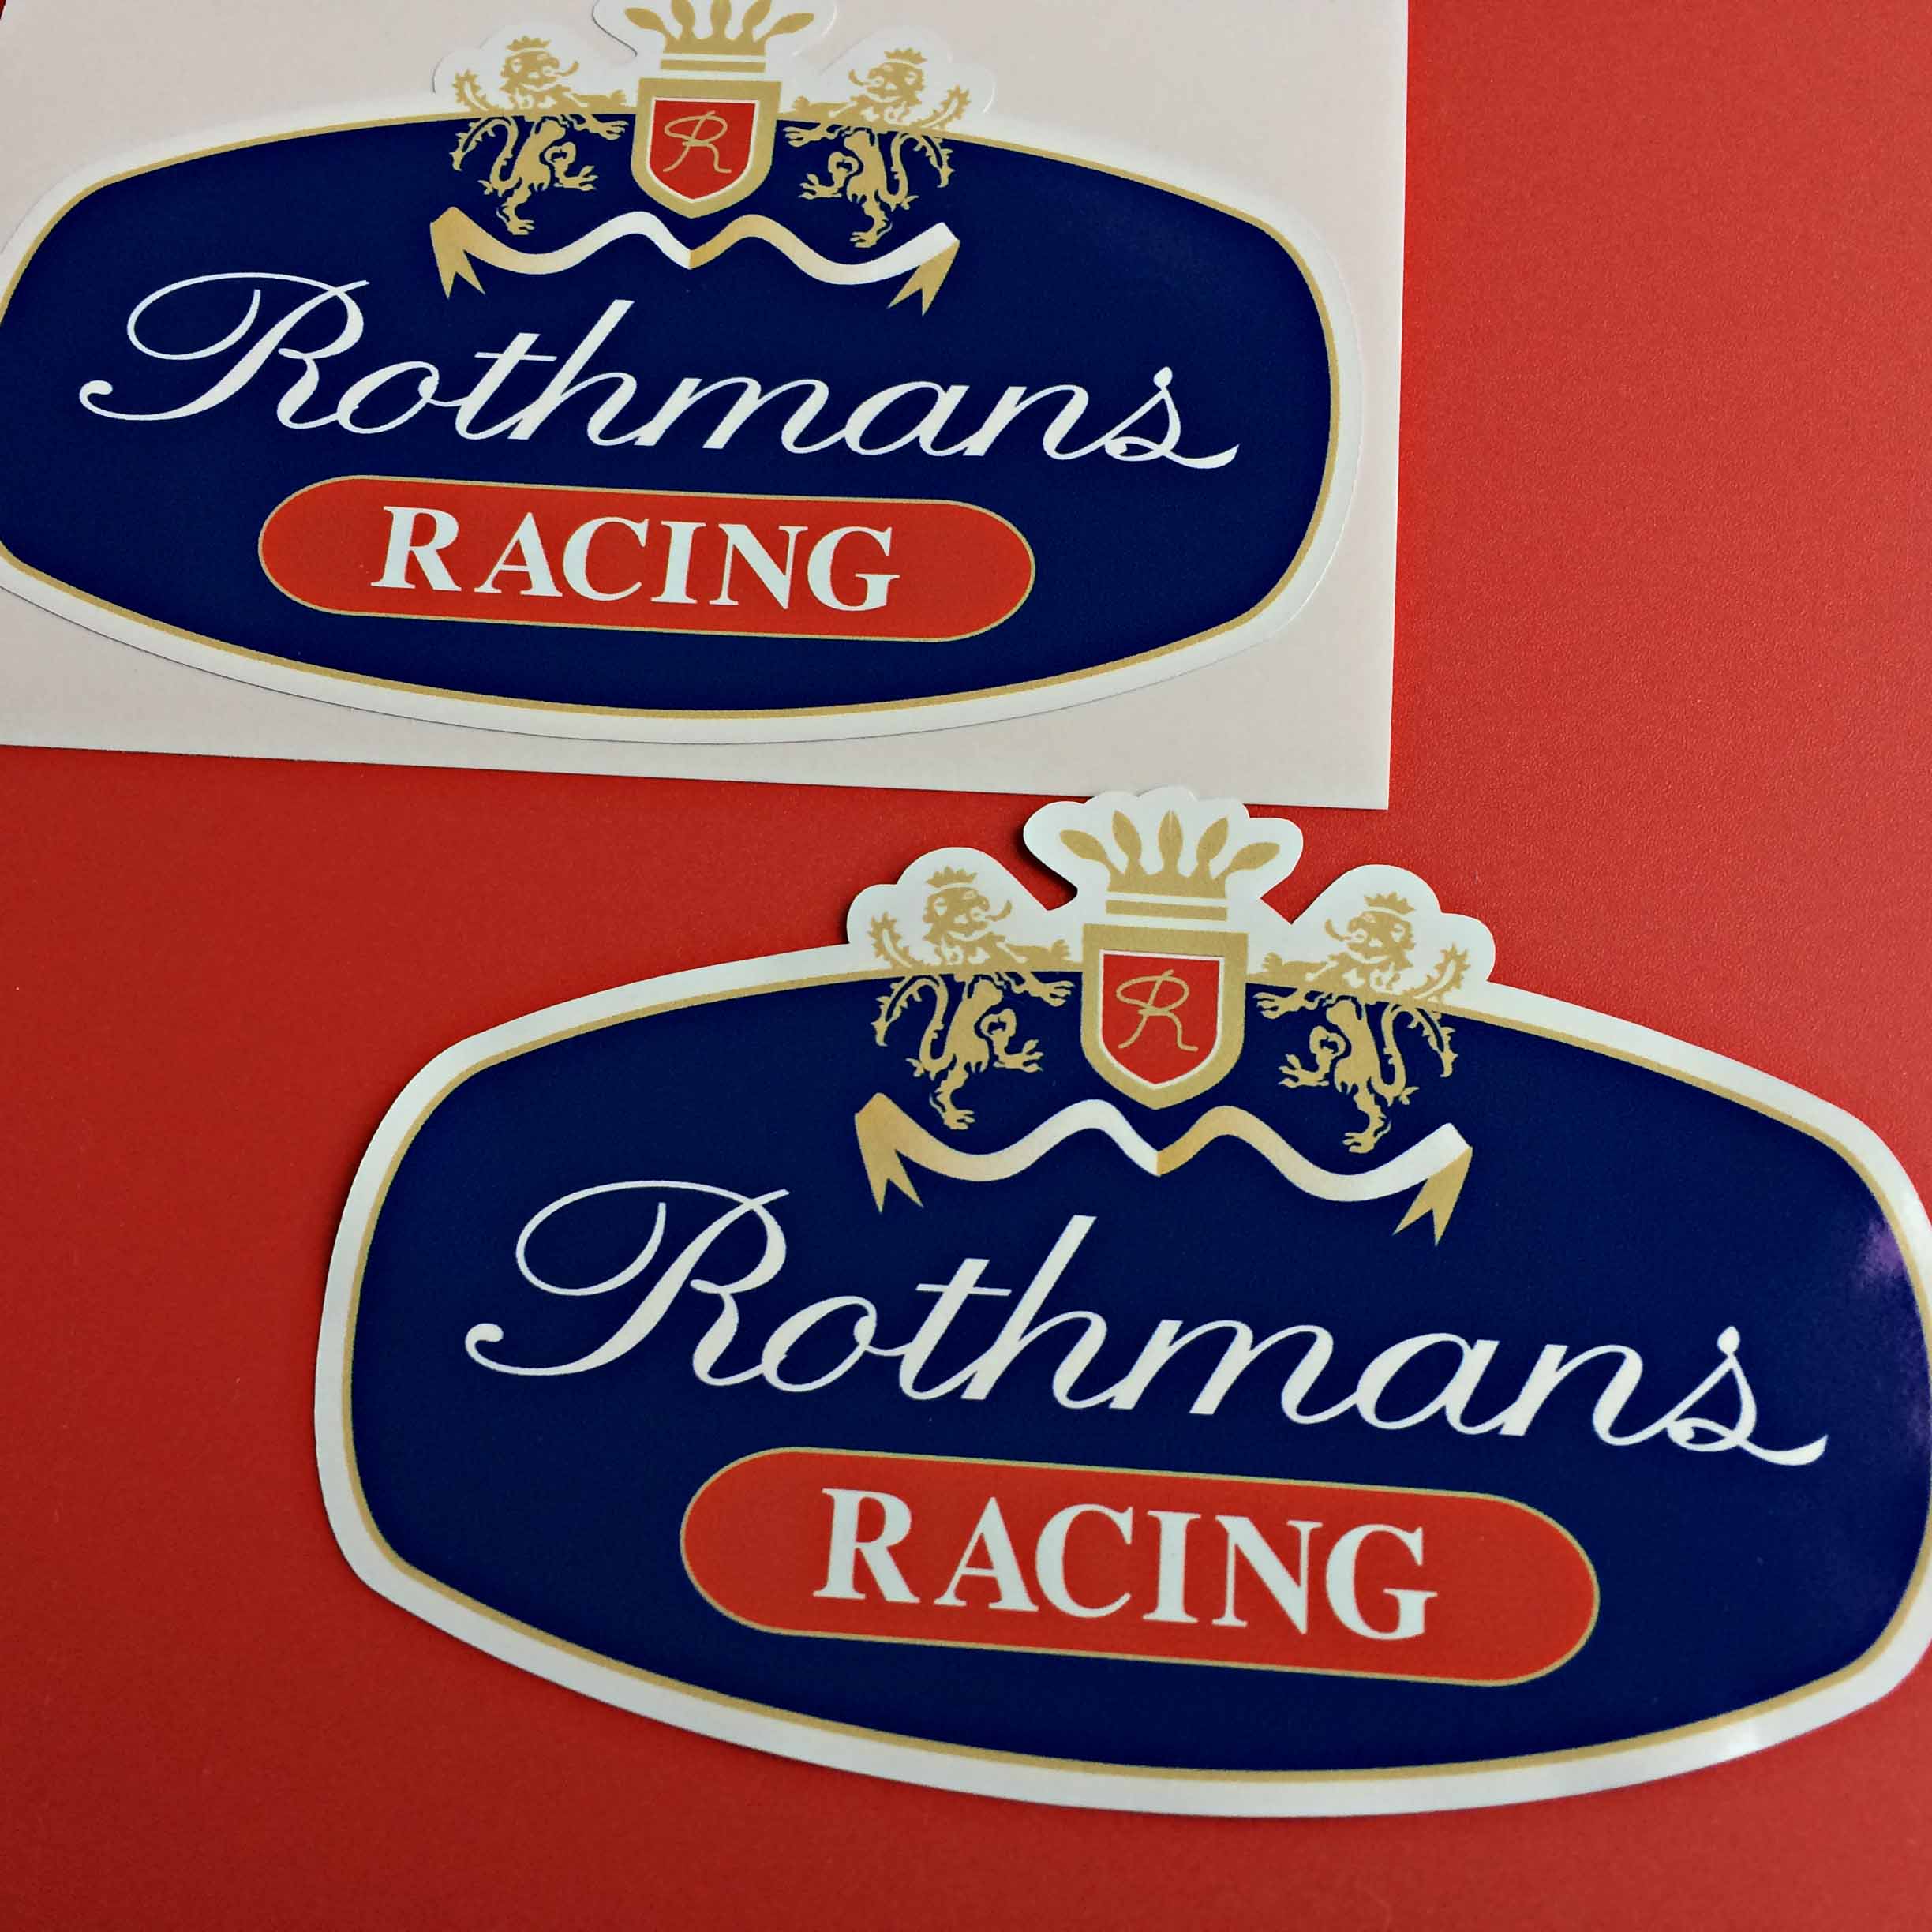 ROTHMANS RACING STICKERS (RED). Rothmans Racing in white lettering on a blue and red background. Two golden lions are either side of a crown and shield. The shield has a gold letter R on a red background.